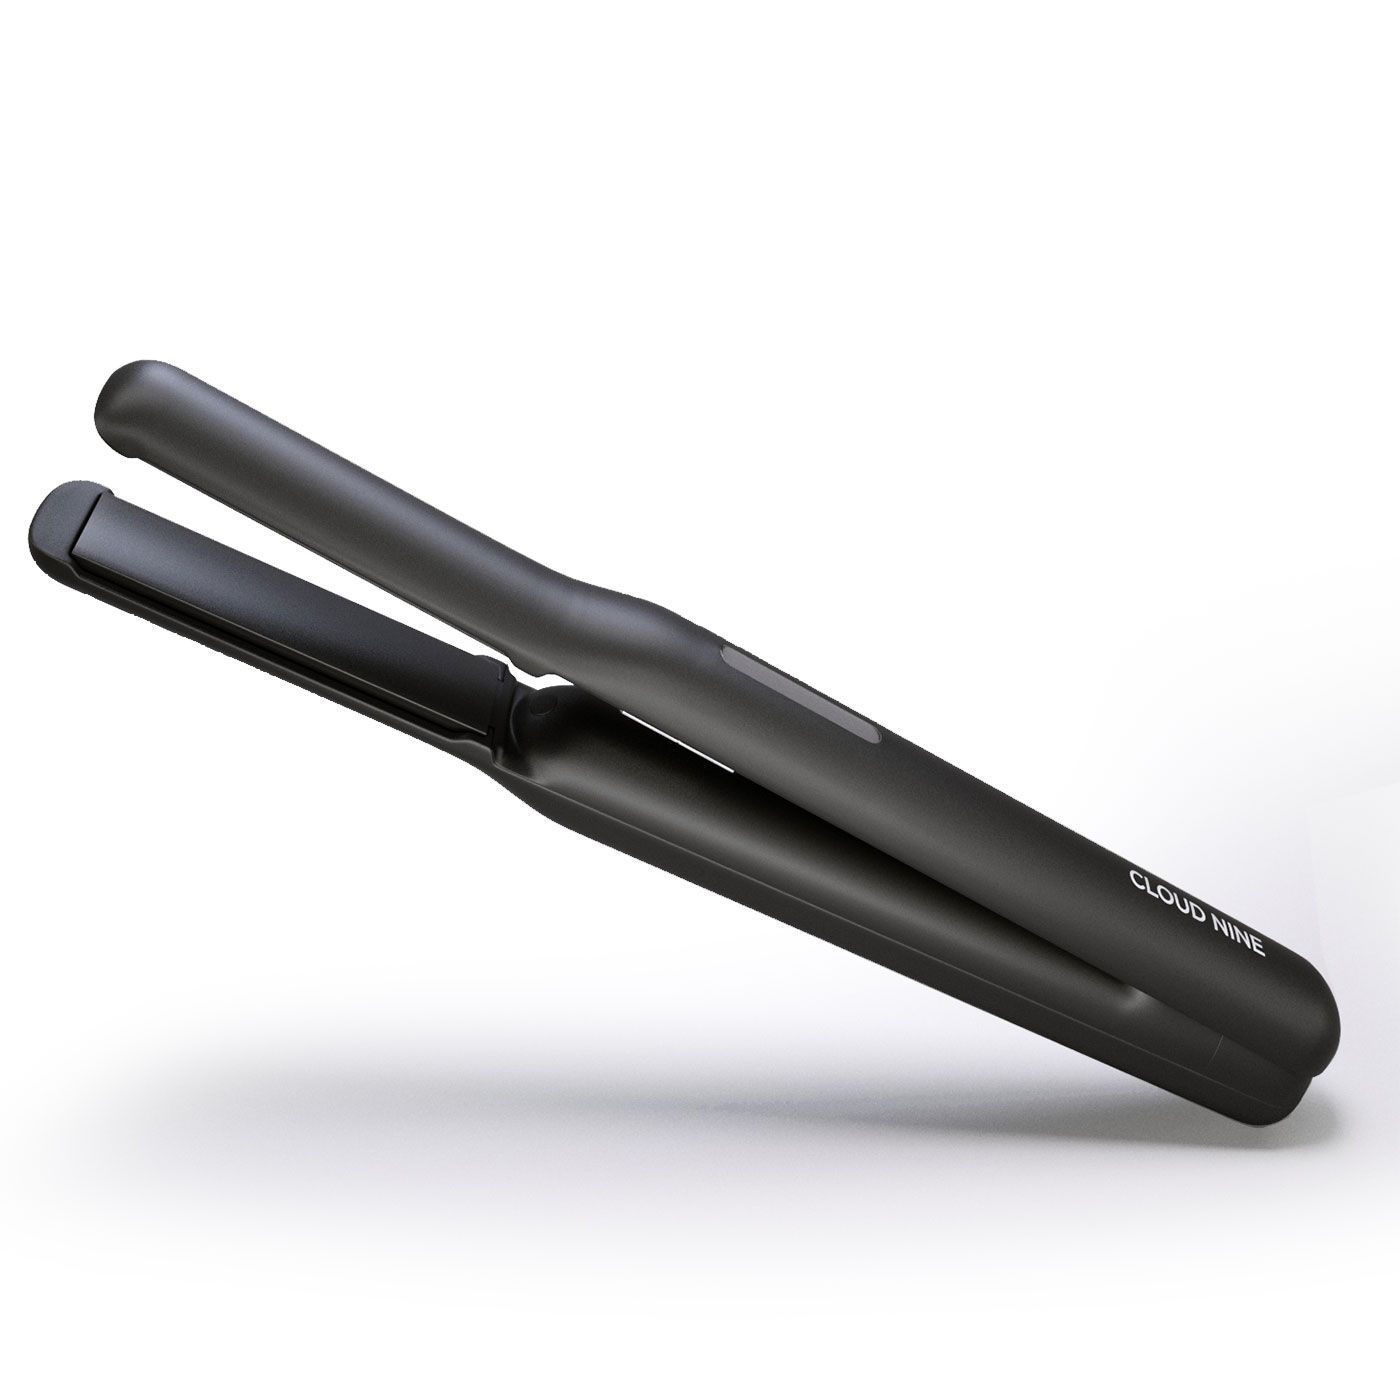 <p><strong>£199.00</strong></p><p><a href="https://www.amazon.co.uk/CLOUD-NINE-Original-Cordless-Straightener/dp/B0BHF3PY27">Shop Now</a></p><p>Cloud Nine have long been a go-to brand for beauty industry insiders, so it's no surprise that their new cordless hair straightener impressed us. </p><p>With two temperatures available (160°C or 170°C) plus the brand's famous 'revive mode' which works to minimise friction, vibrating at 8,000 times a minute, hair can be styled easily at lower temperatures.</p><p>It comes with a clever charging stand and takes only 45 minutes to charge, which then gives 30 minutes of styling time. </p>